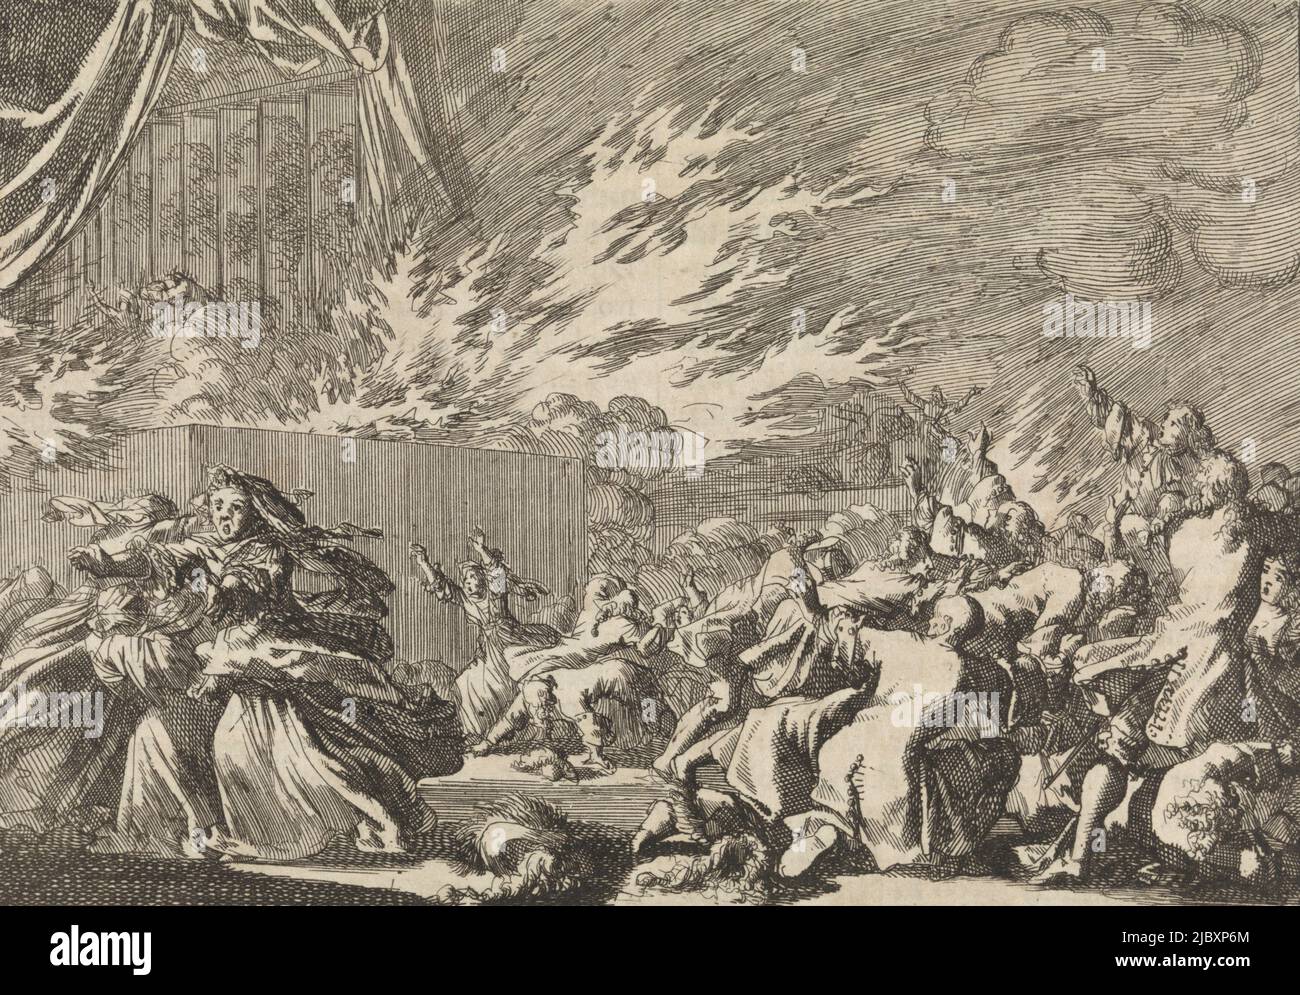 Fire of a wooden shed in which a theatrical performance is taking place next to Amelienborg Castle in Copenhagen, 1689, print maker: Jan Luyken, publisher: Pieter van der Aa (I), print maker: Amsterdam, publisher: Leiden, 1698, paper, etching, letterpress printing, h 111 mm × w 156 mm Stock Photo